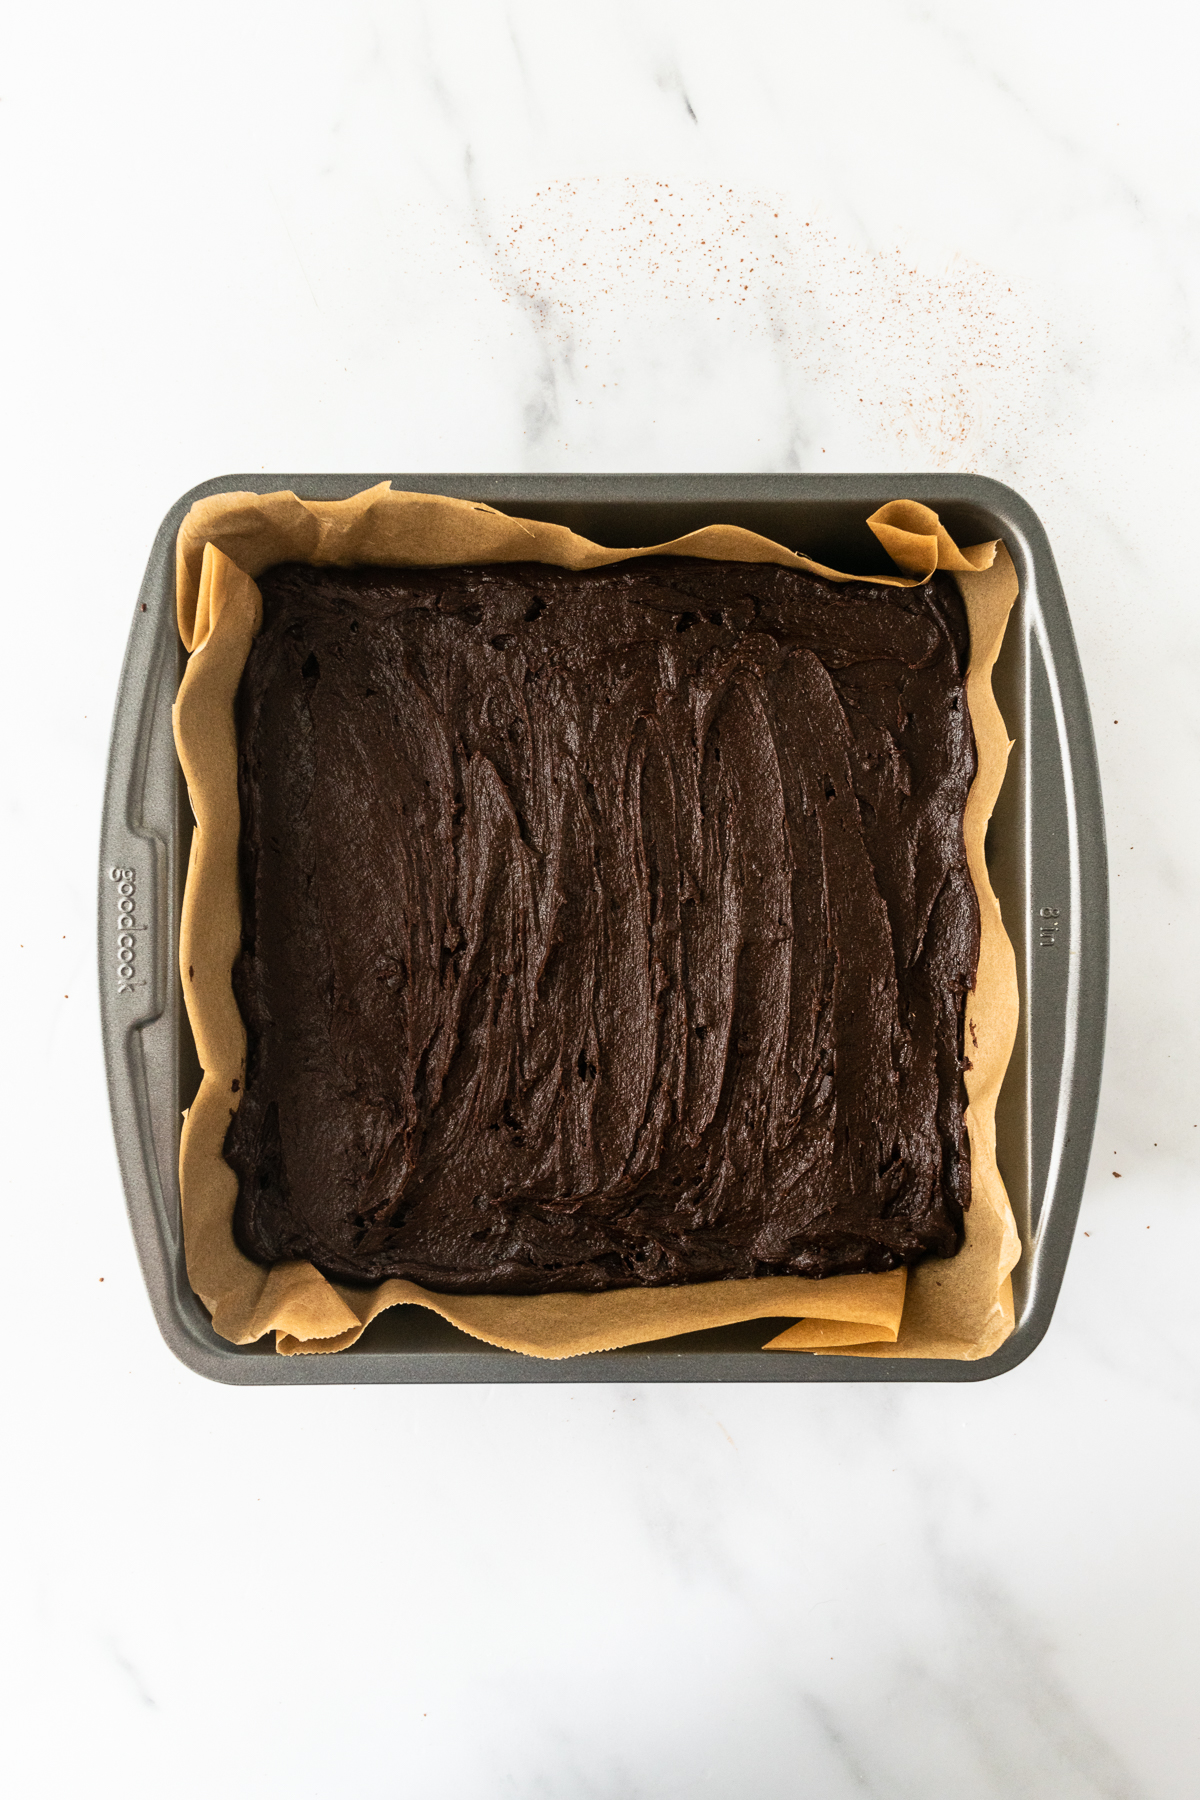 brownie batter in a square baking pan lined with parchment paper.